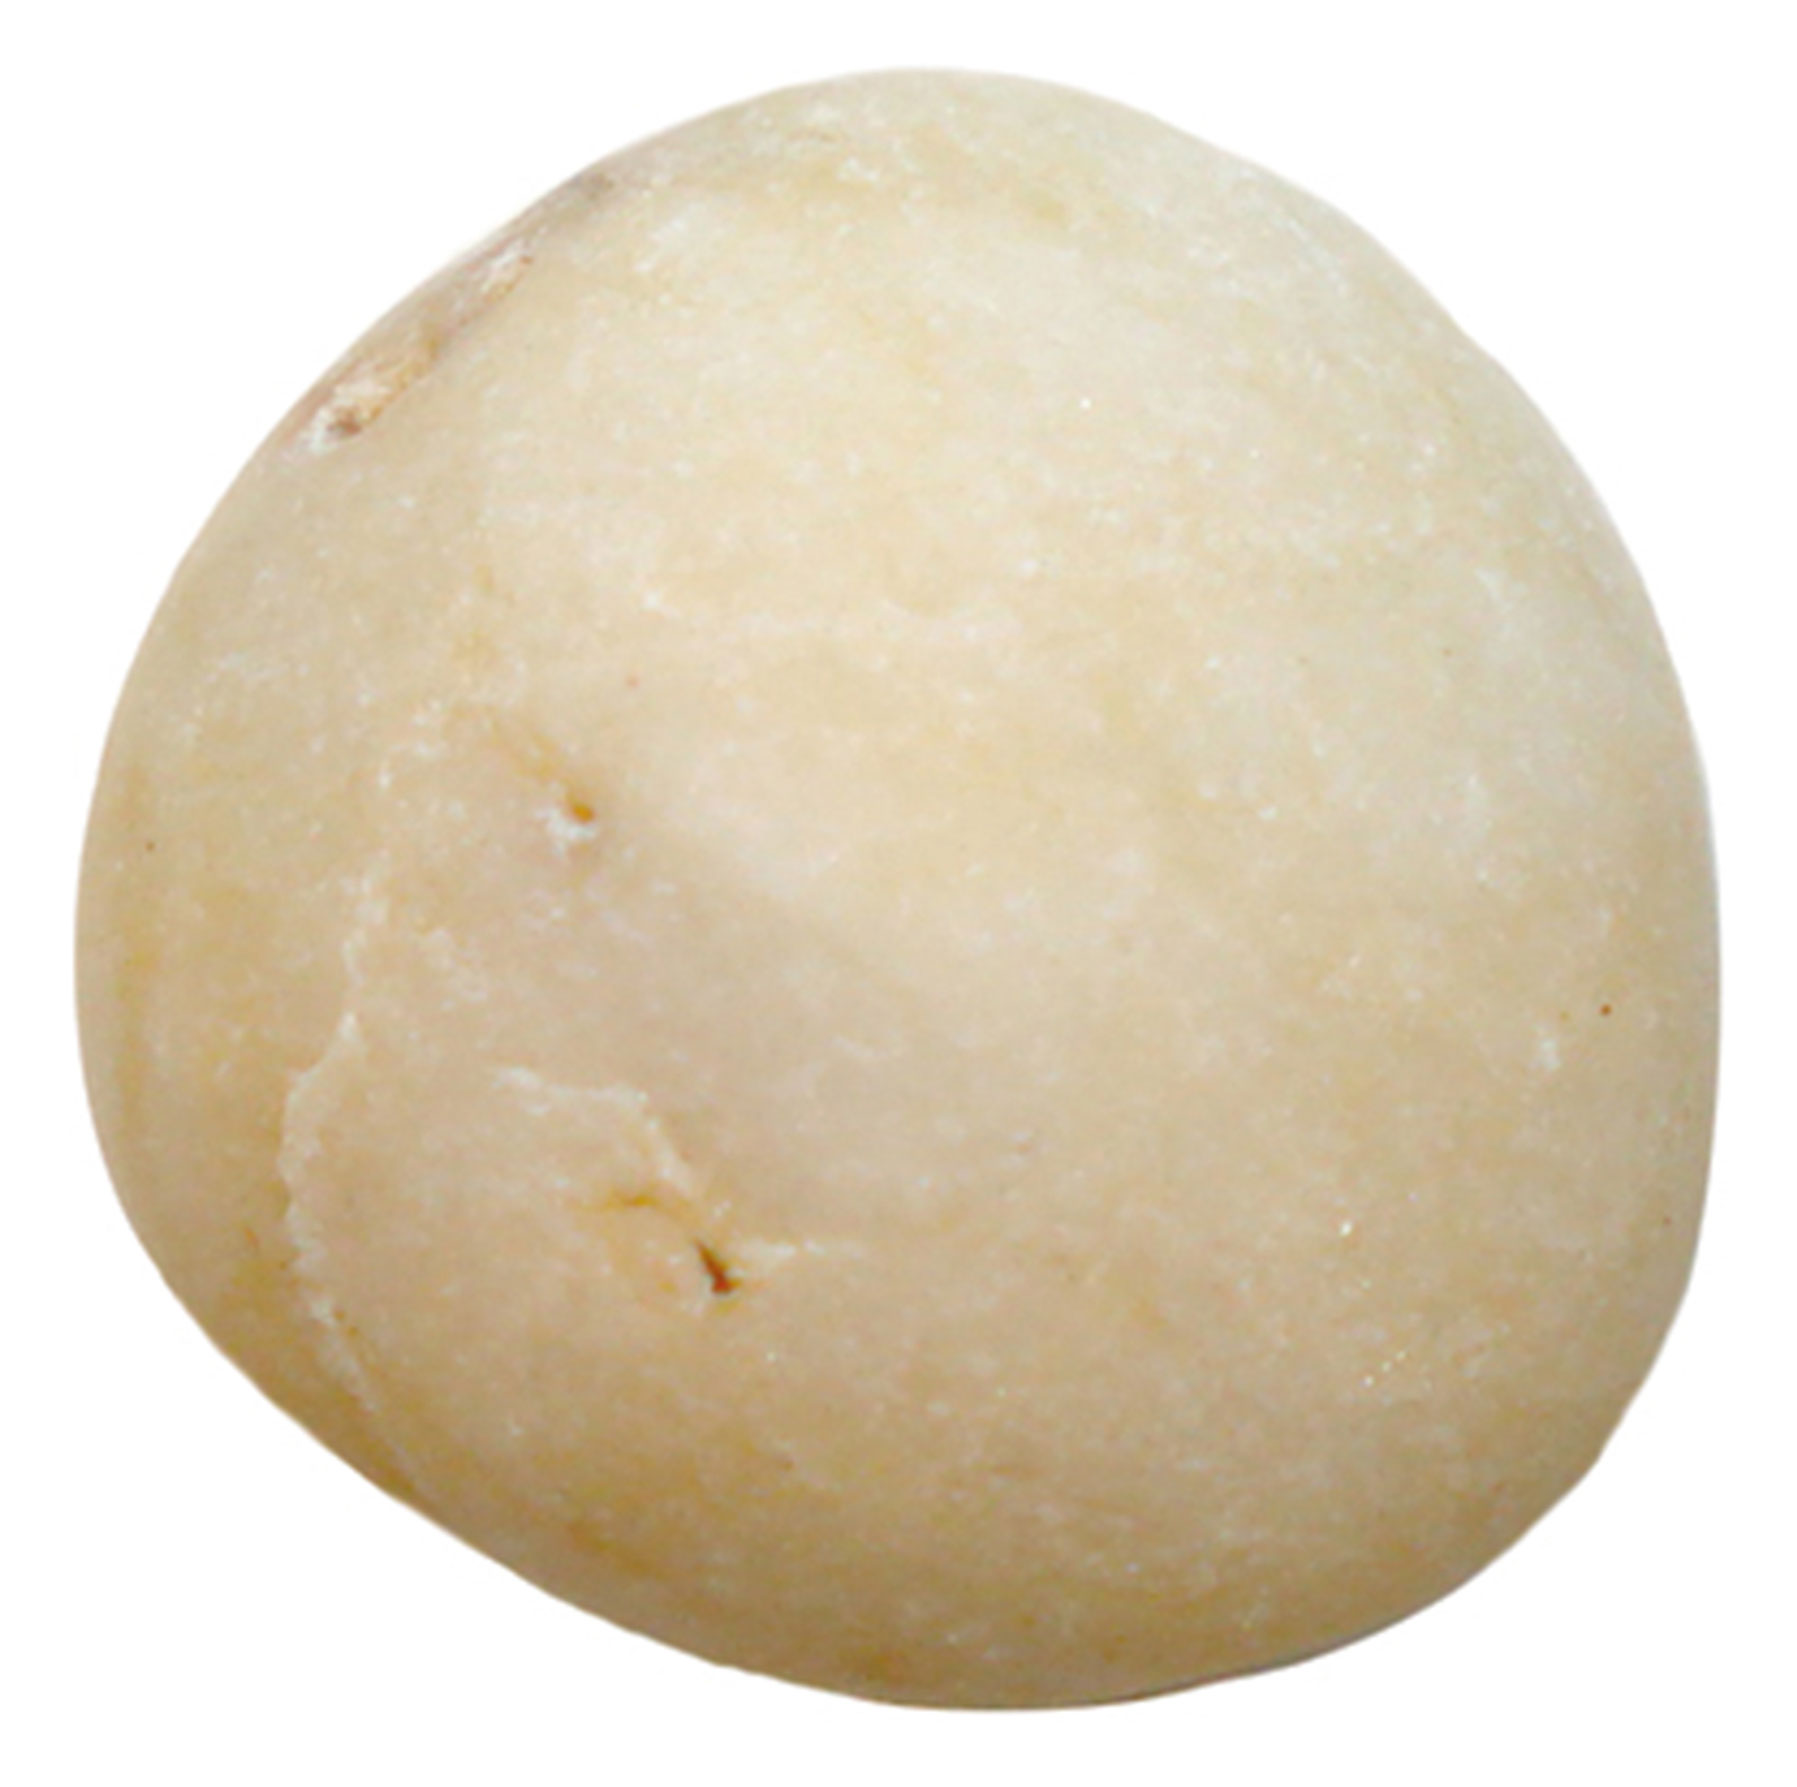 A photograph of a rock which resembles a macadamia nut. 